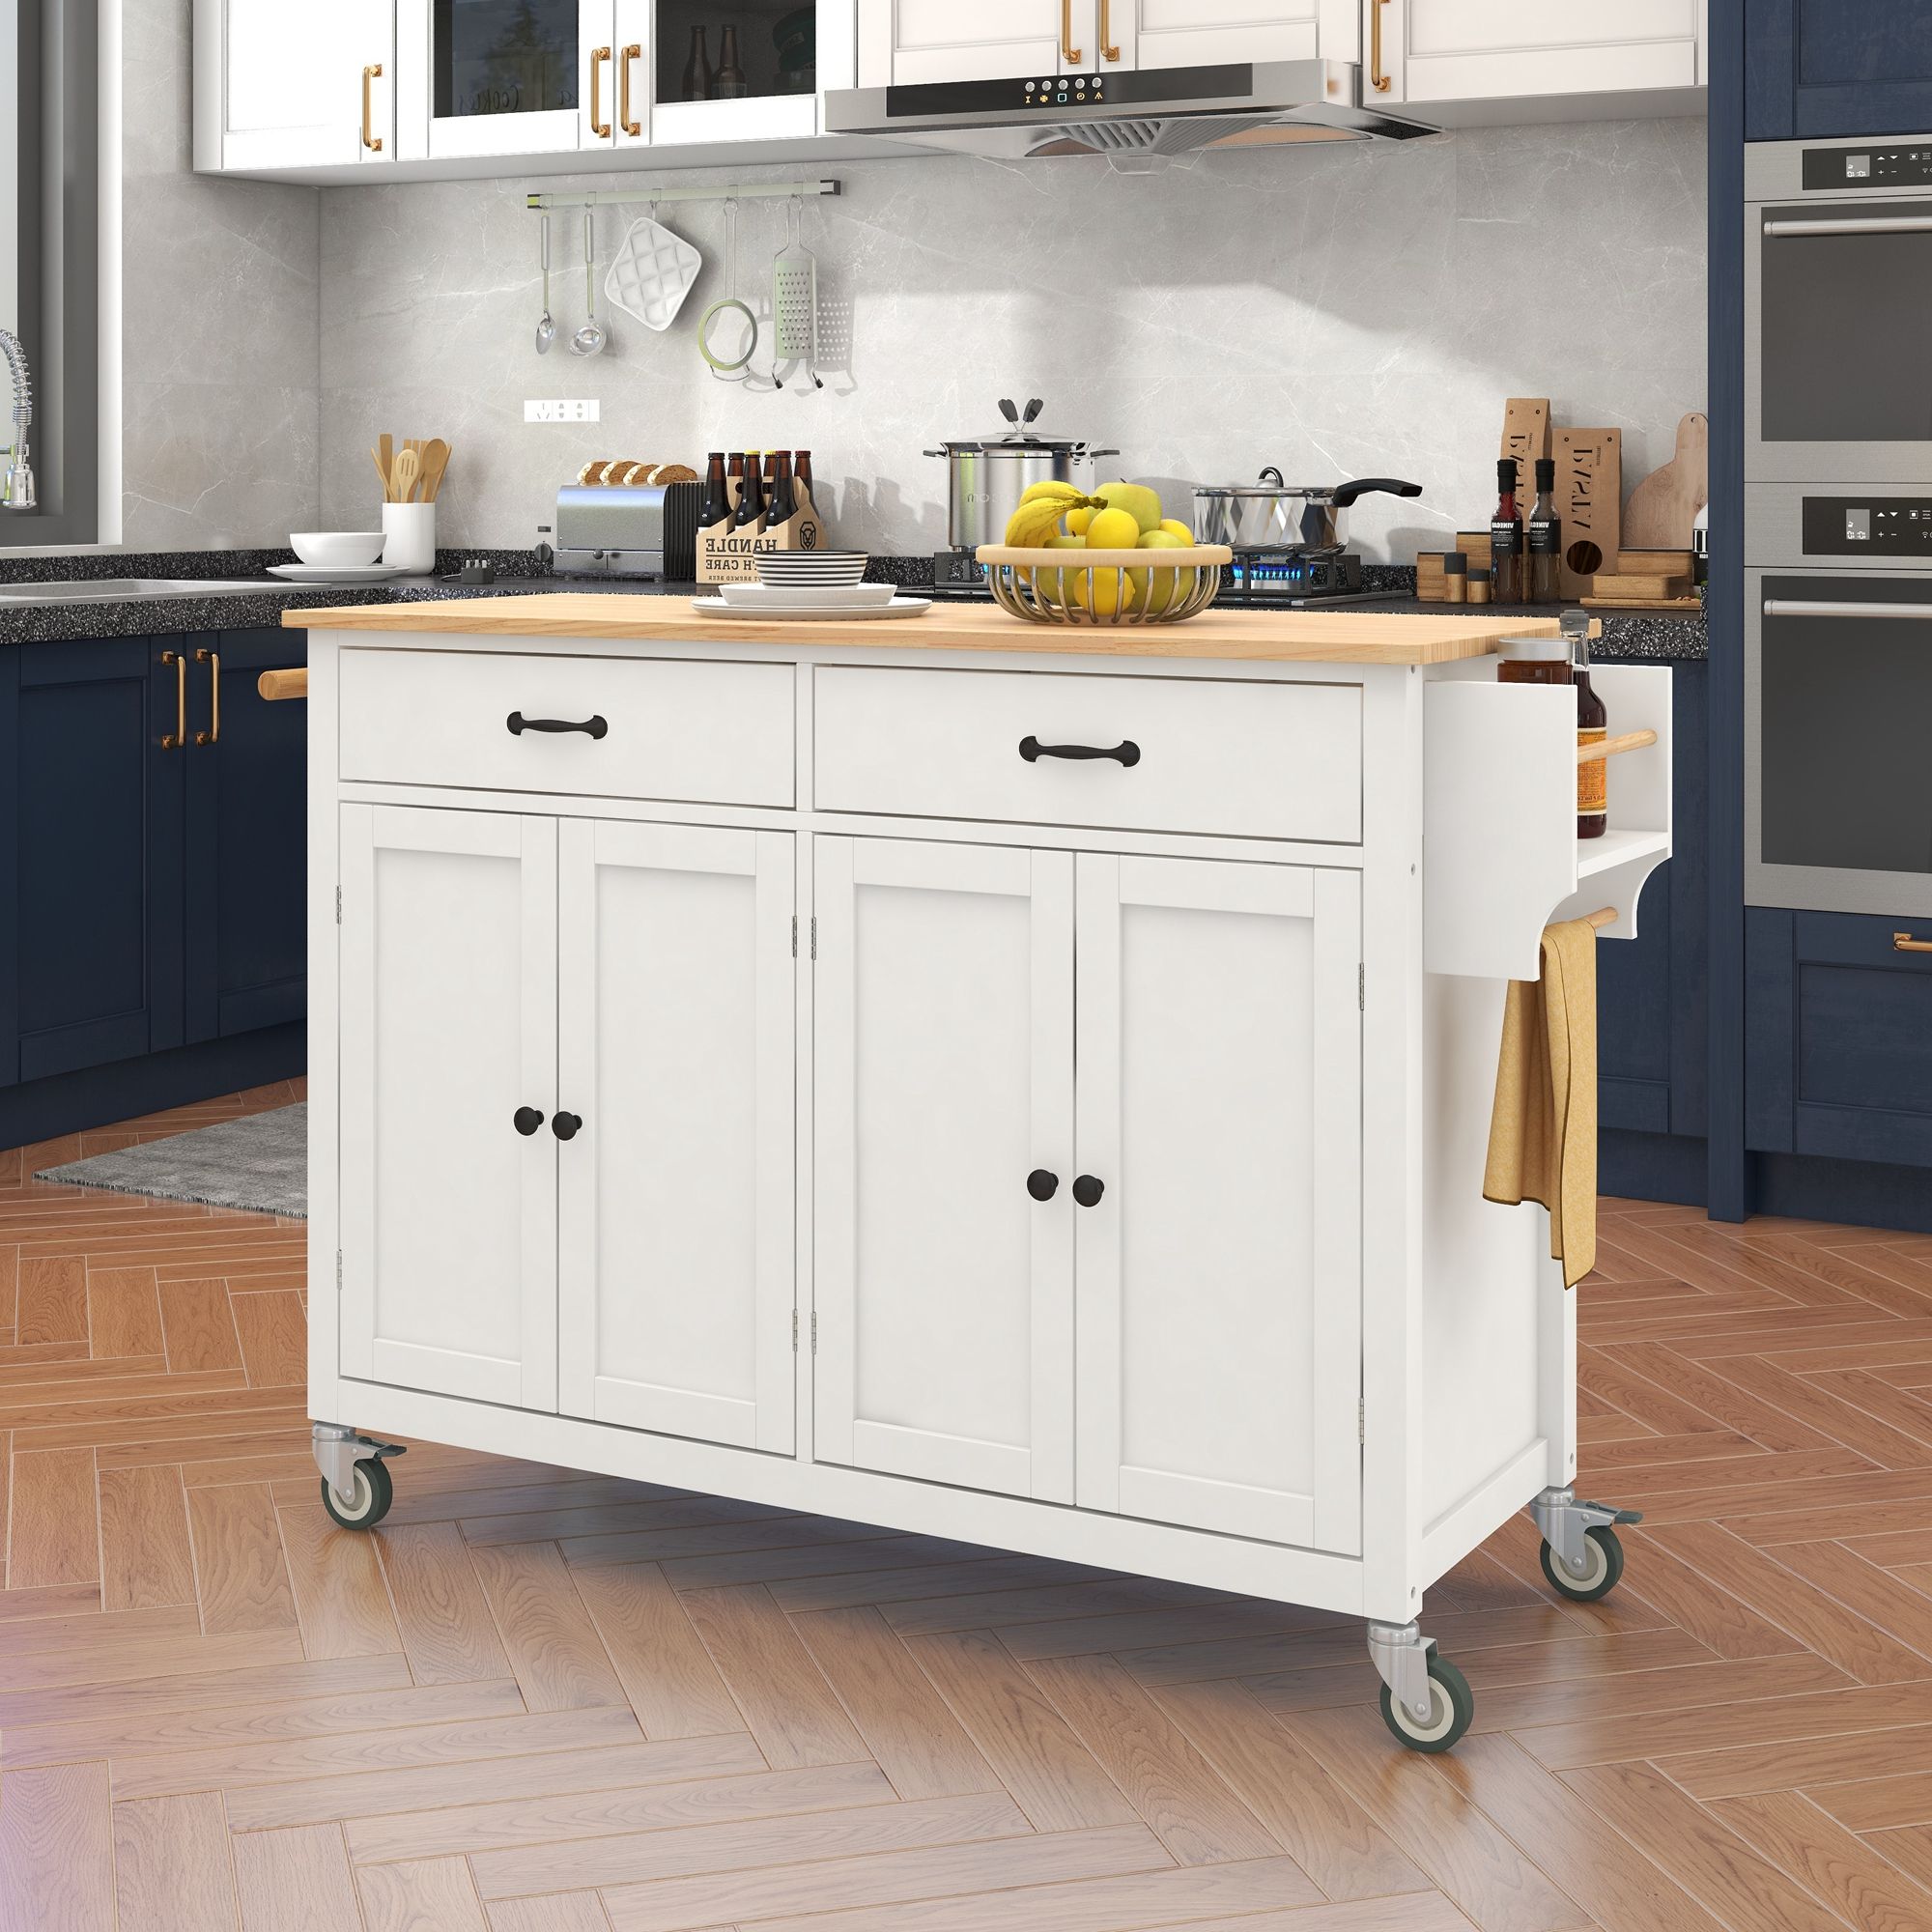 Kitchen Islands & Carts at Lowes.com